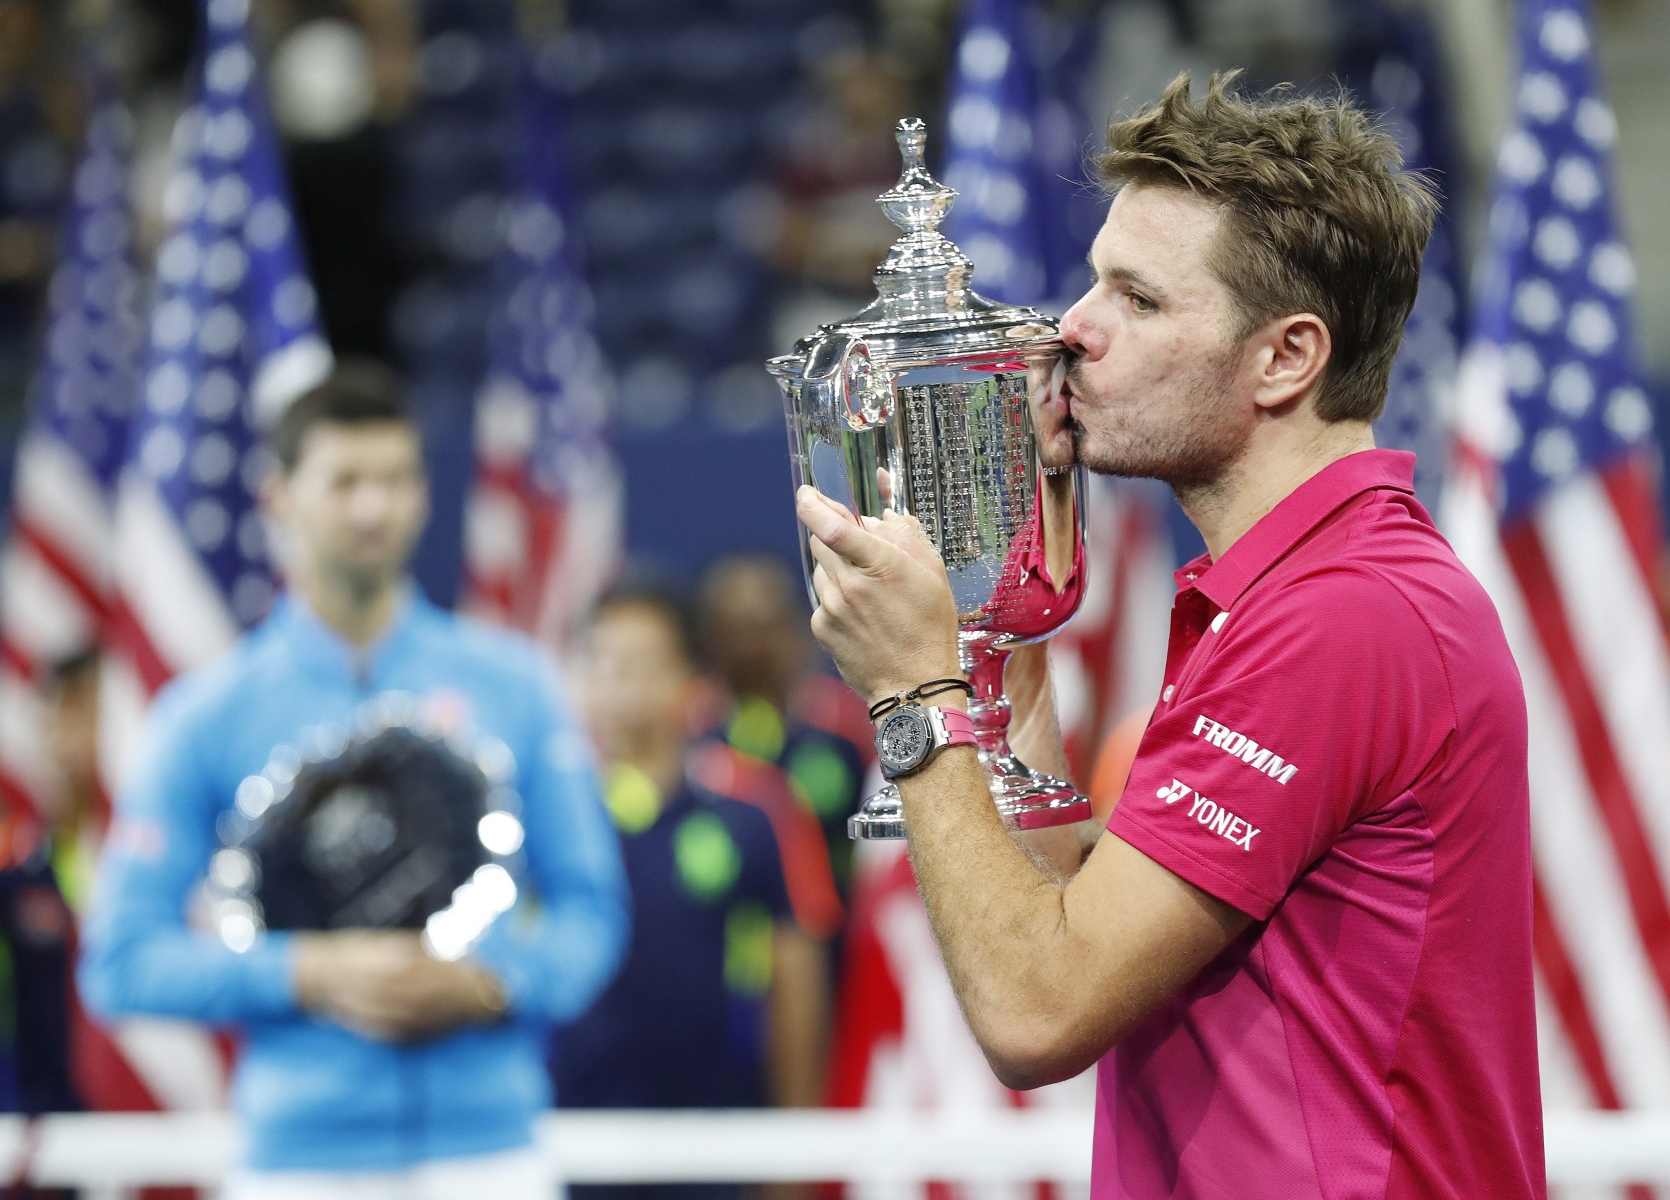 epa05535778 Stan Wawrinka of Switzerland (R) during the trophy ceremony after defeating Novak Djokovic of Serbia (L) during the men's final on the final day of the US Open Tennis Championships at the USTA National Tennis Center in Flushing Meadows, New York, USA, 11 September 2016.  The US Open runs through September 11.  EPA/JUSTIN LANE